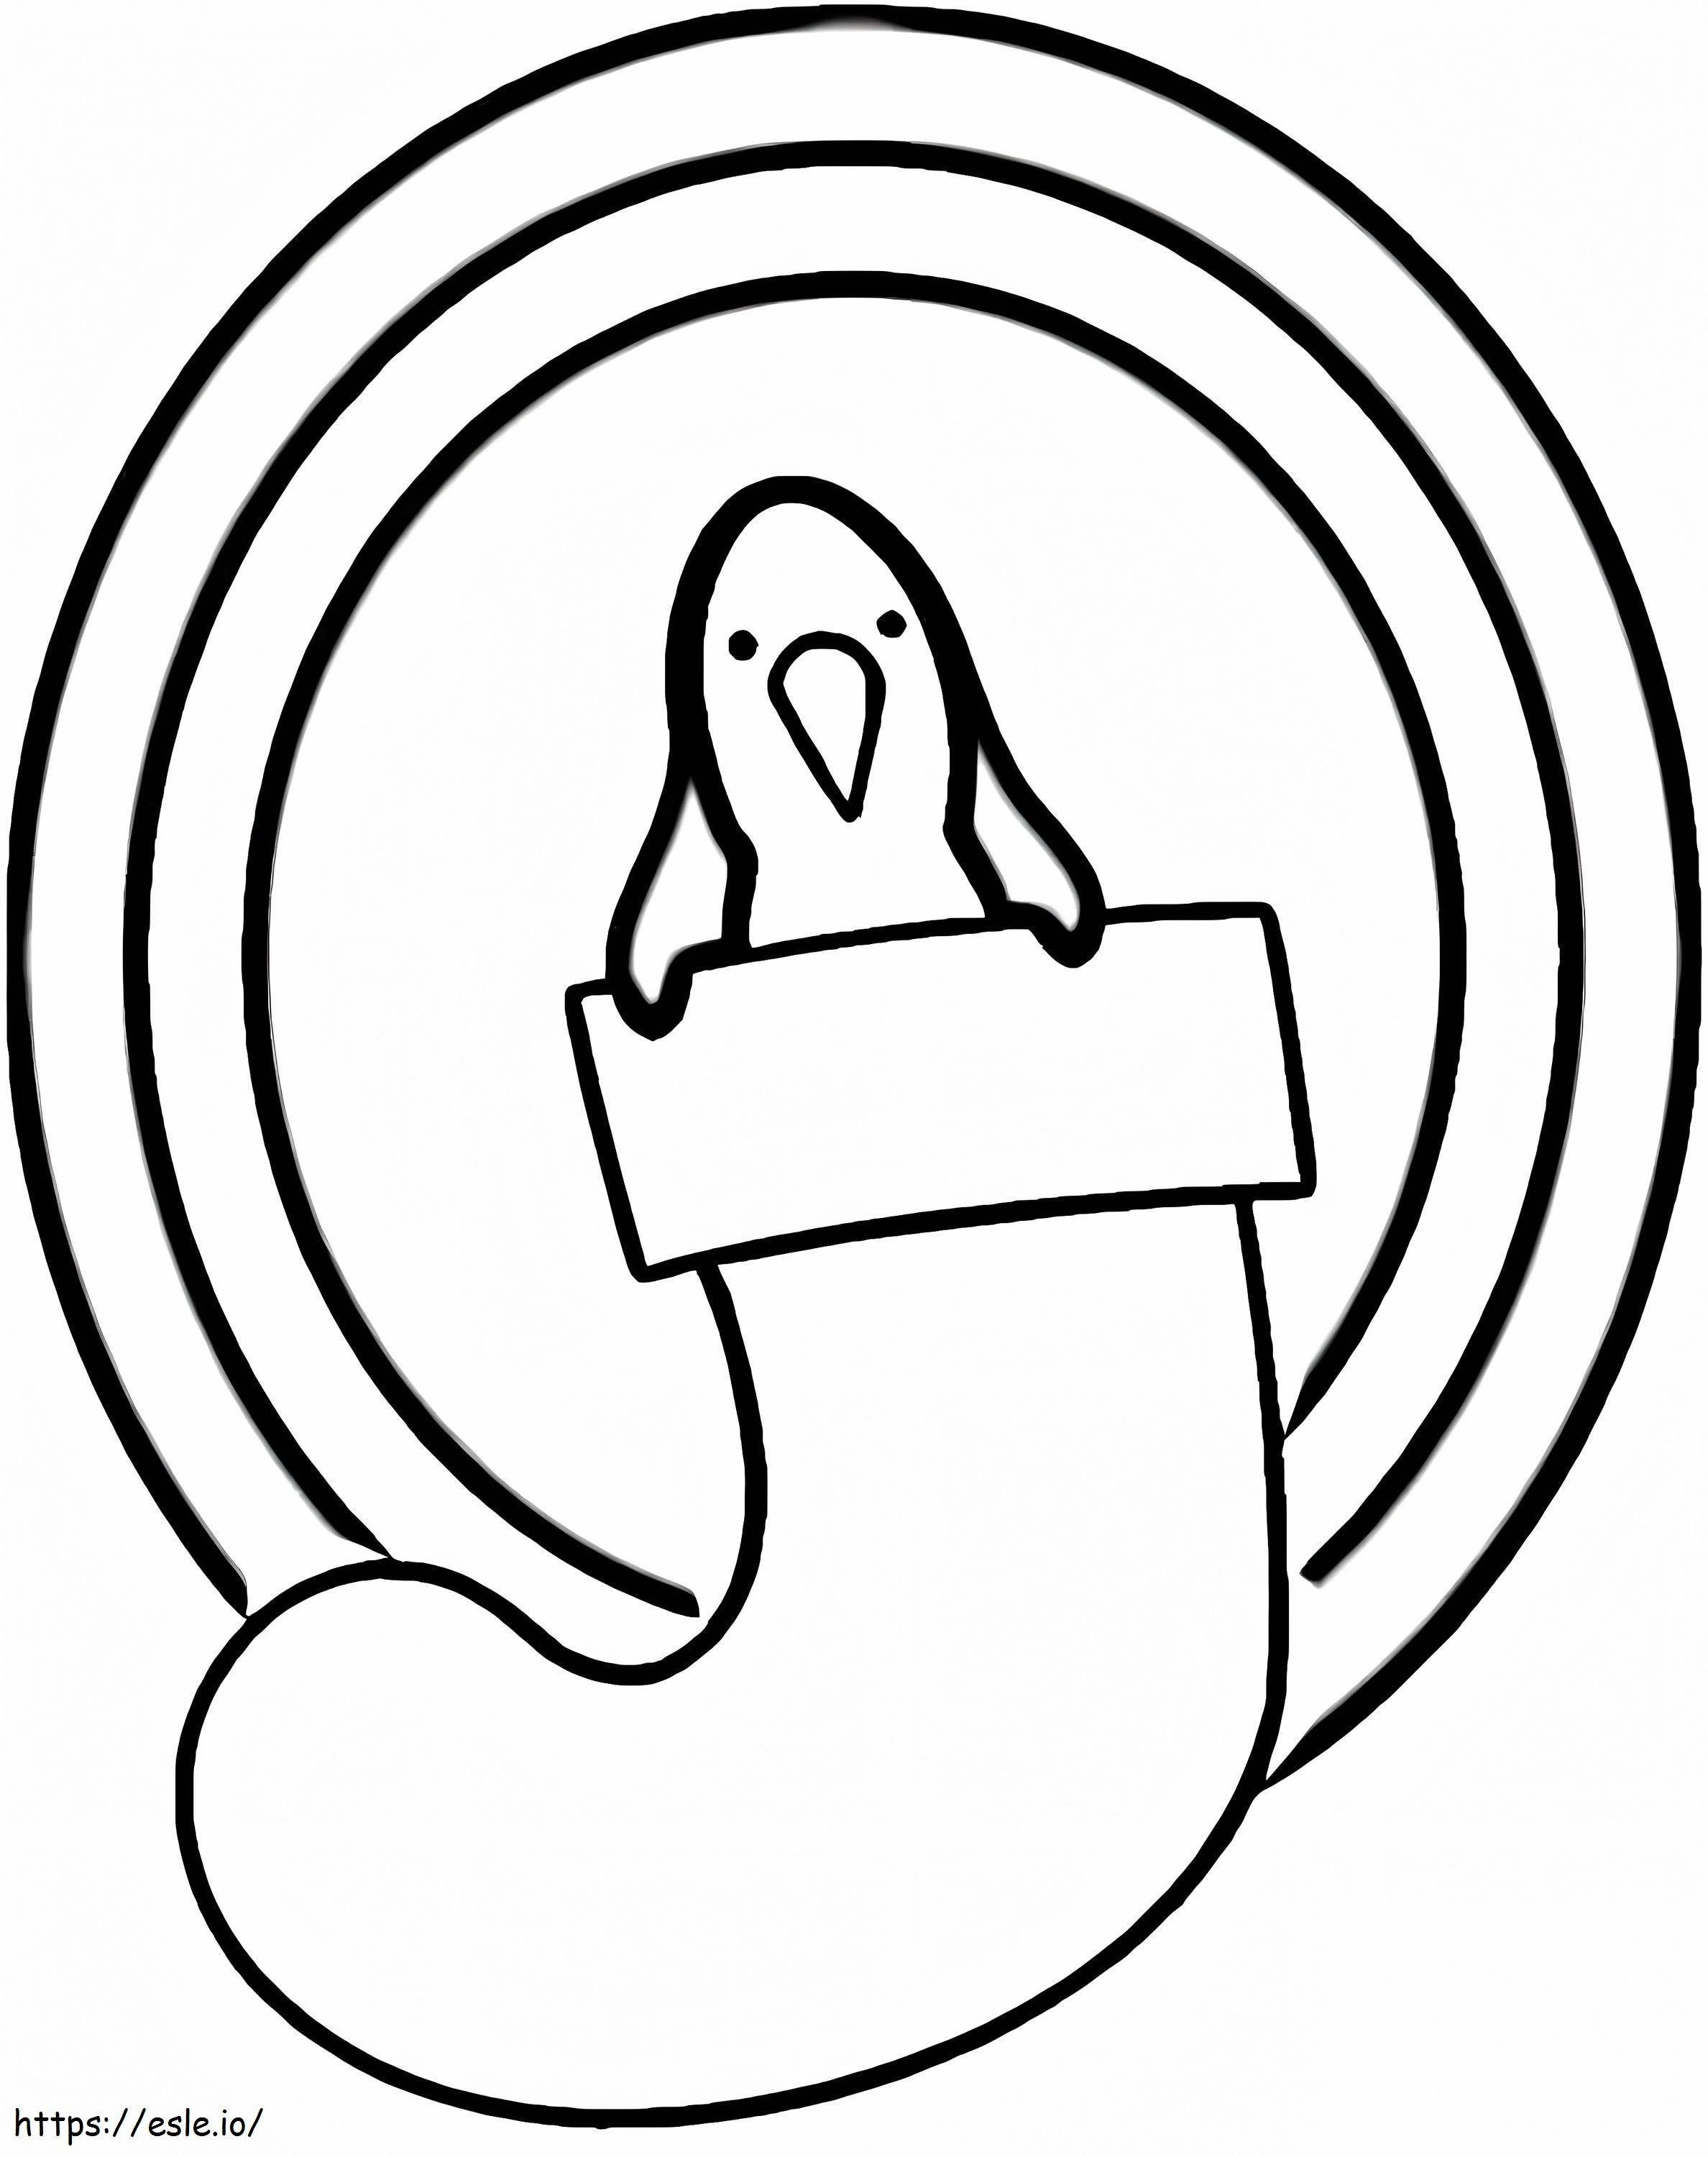 Penguin In Christmas Stocking coloring page